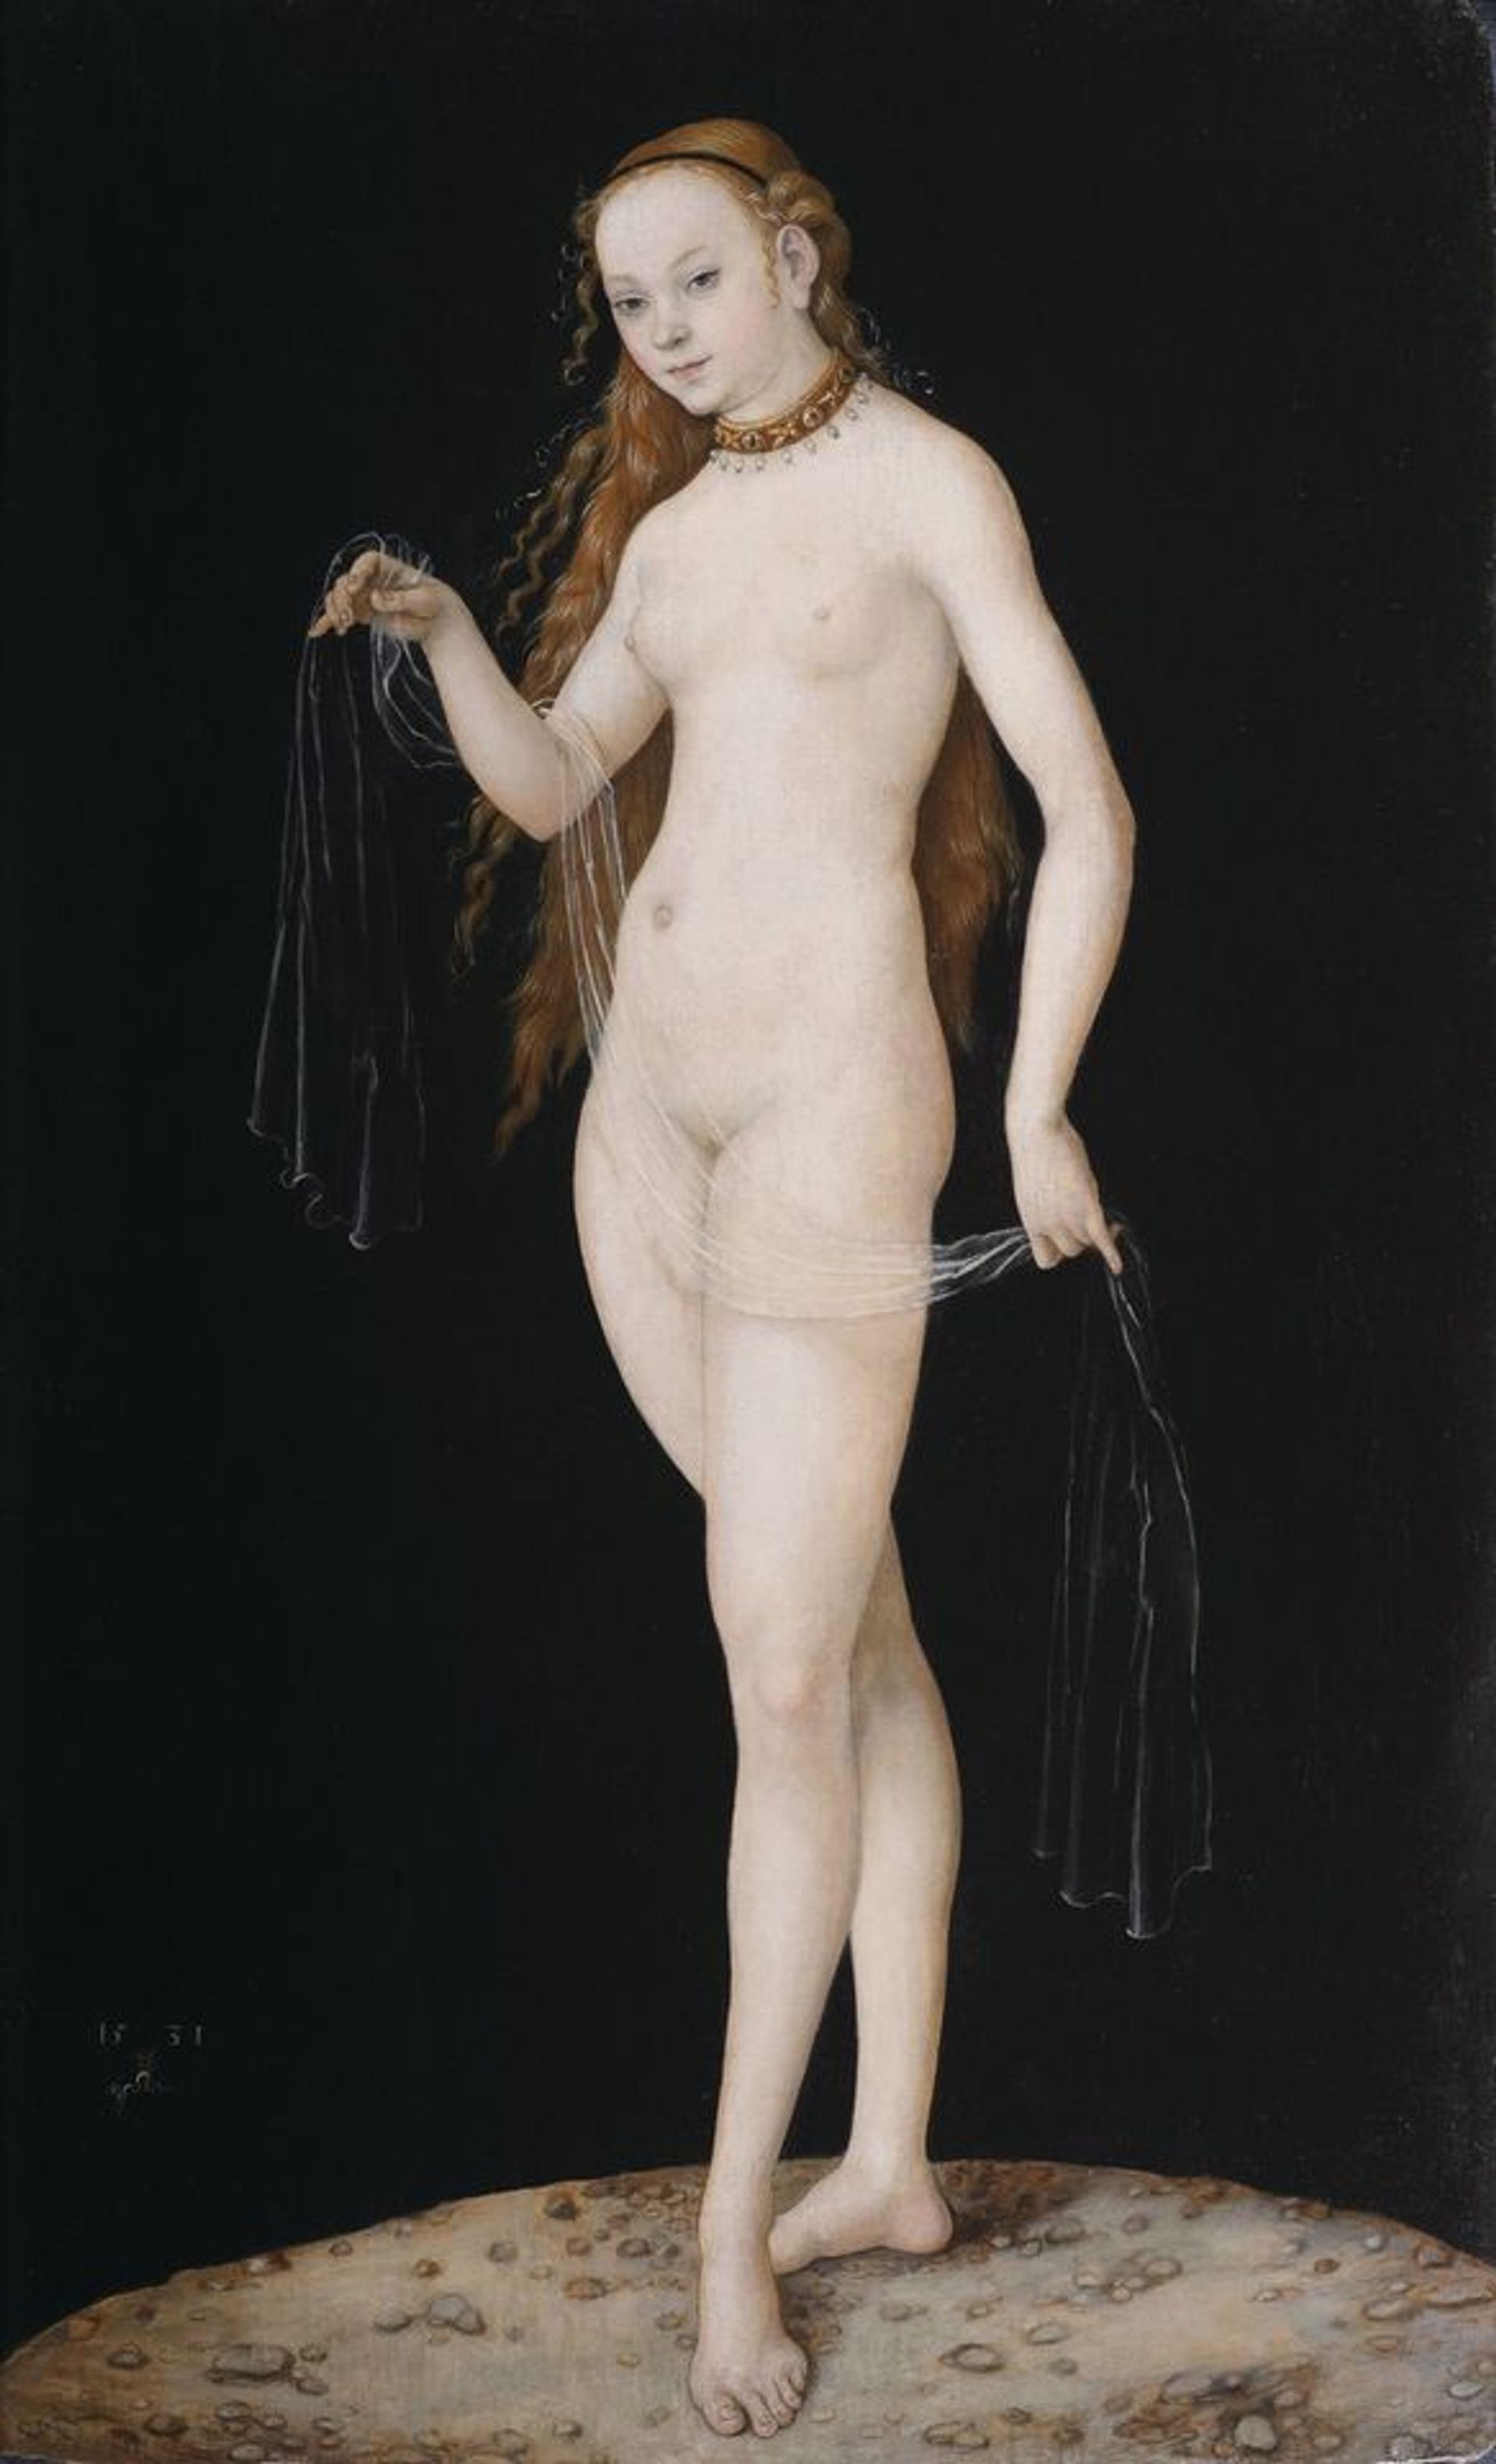 The Venus was sold to the prince as a purported Cranach © Liechtenstein. The Princely Collections, Vaduz–Vienna